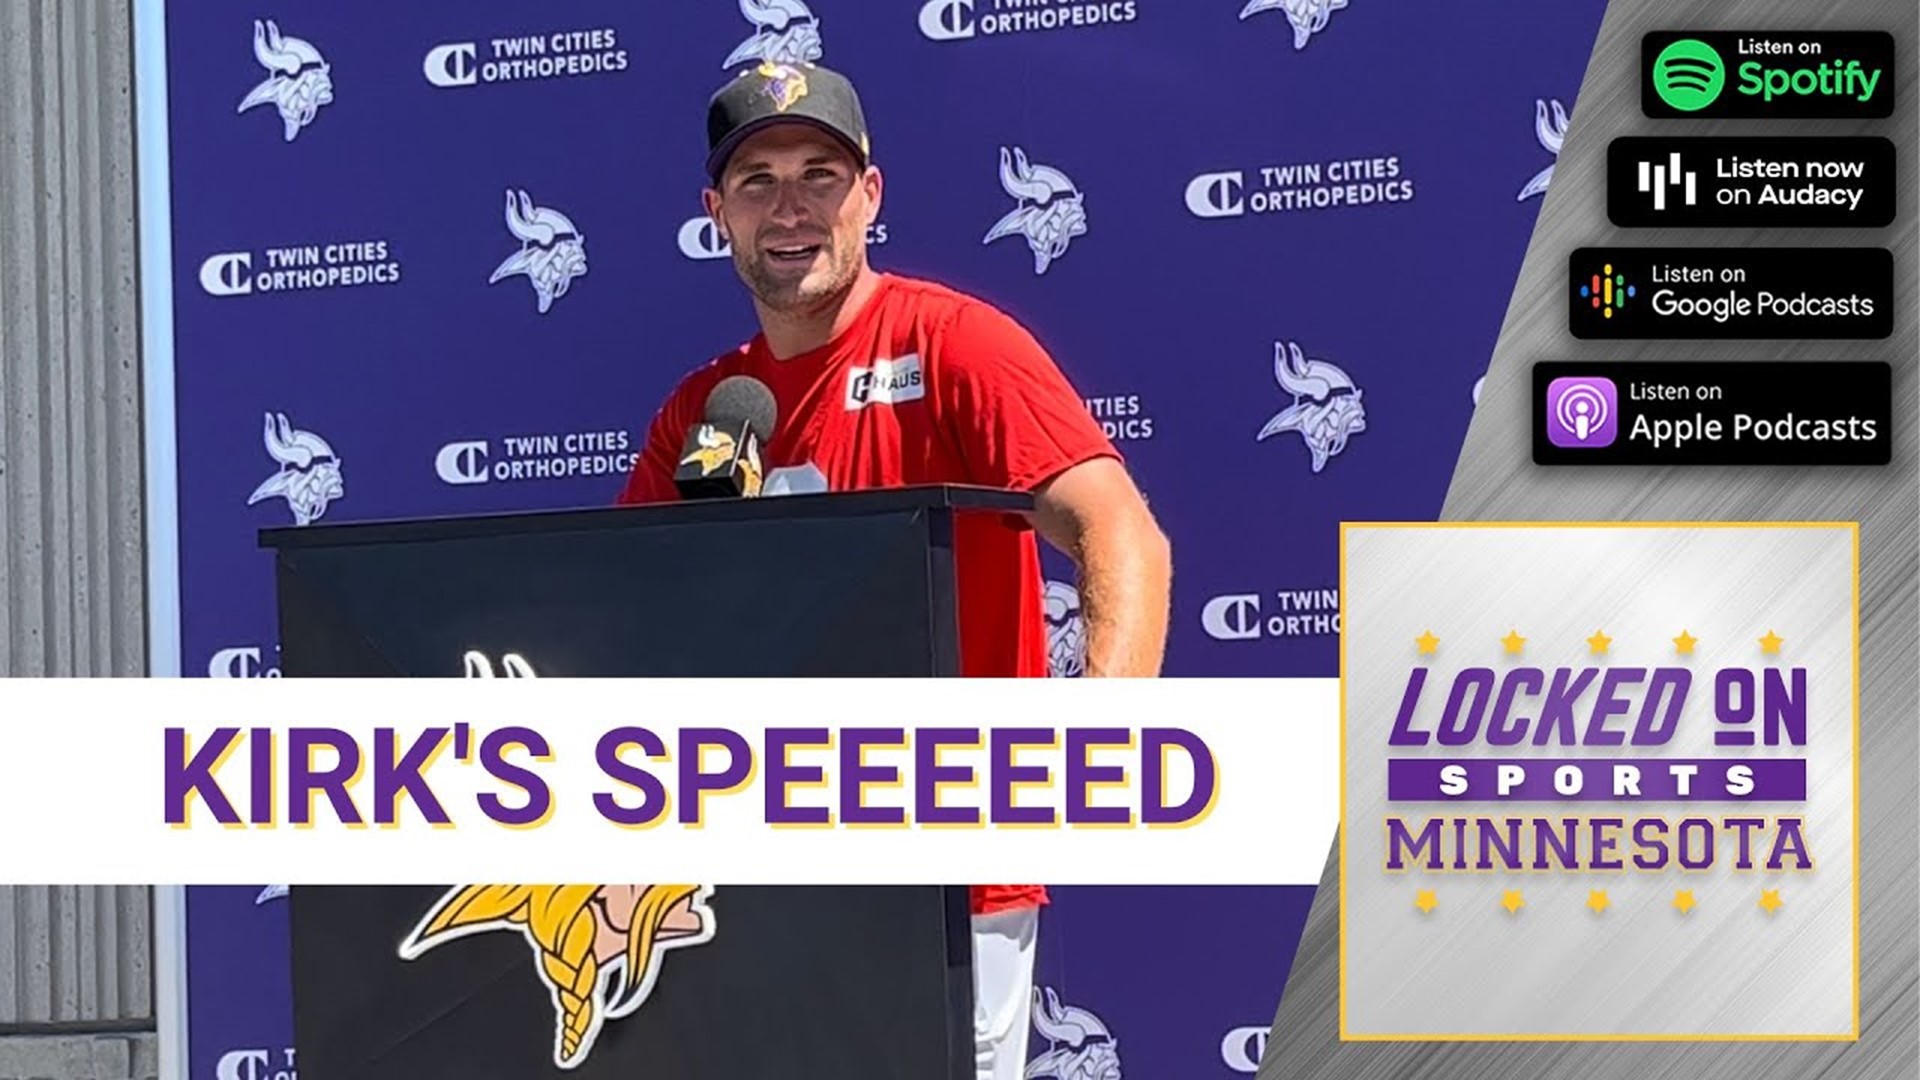 Minnesota Vikings QB Kirk Cousins discusses his top running speed as he brings up backup tight end Zach Davidson as another speedy option in the offense.